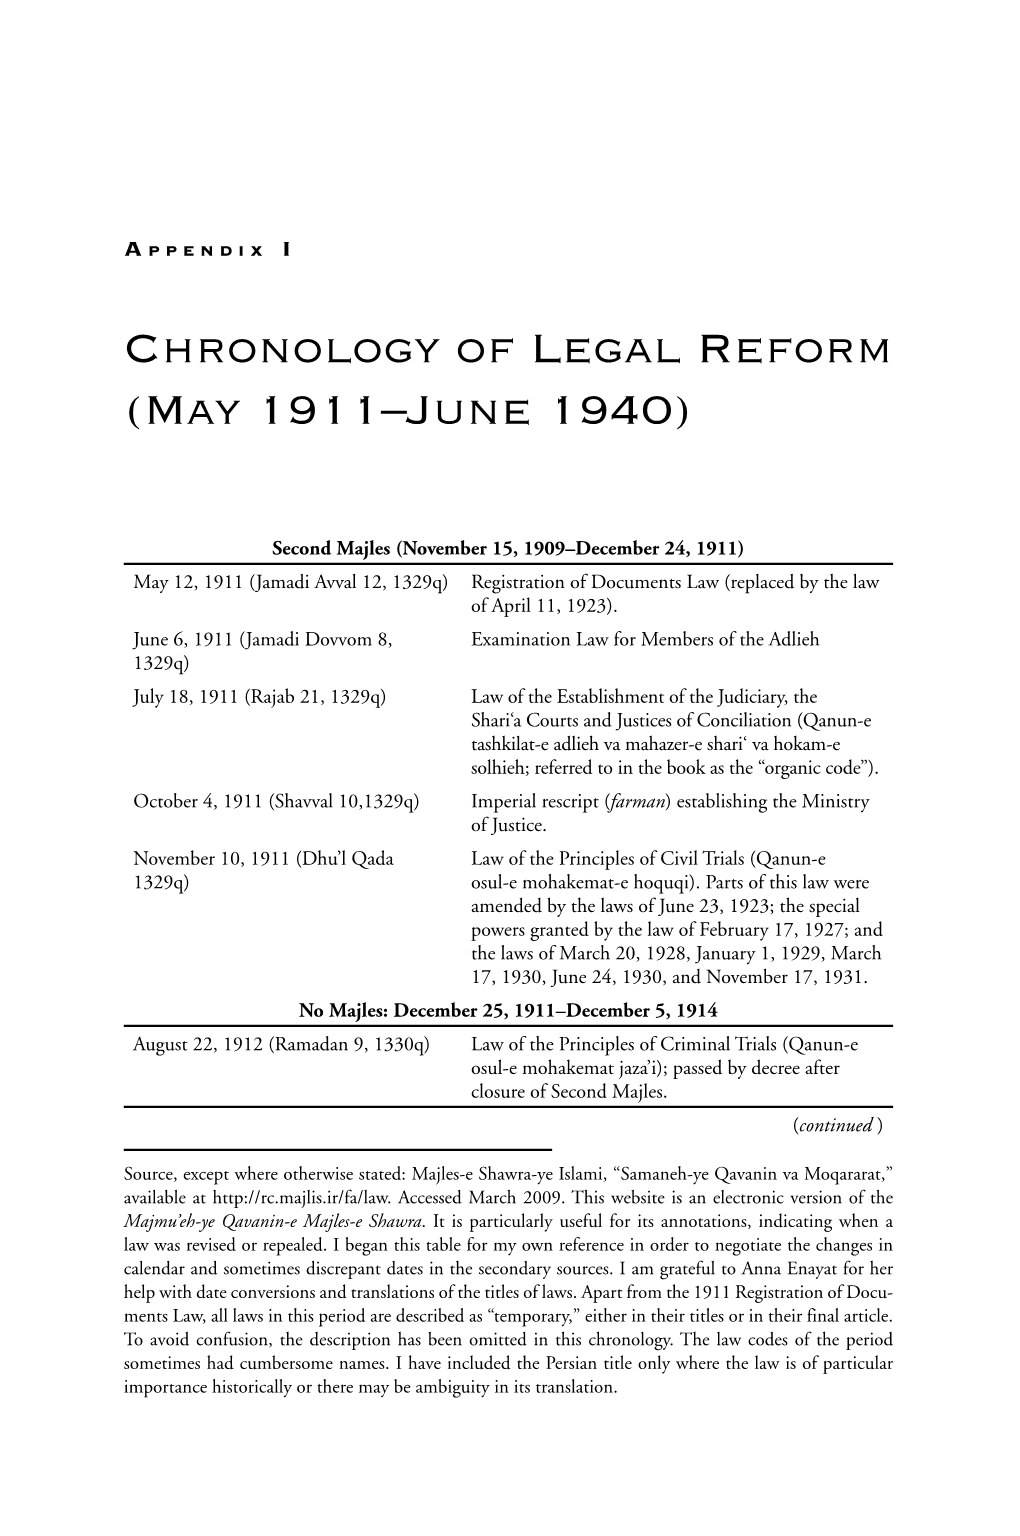 Chronology of Legal Reform (May 1911– June 1940)